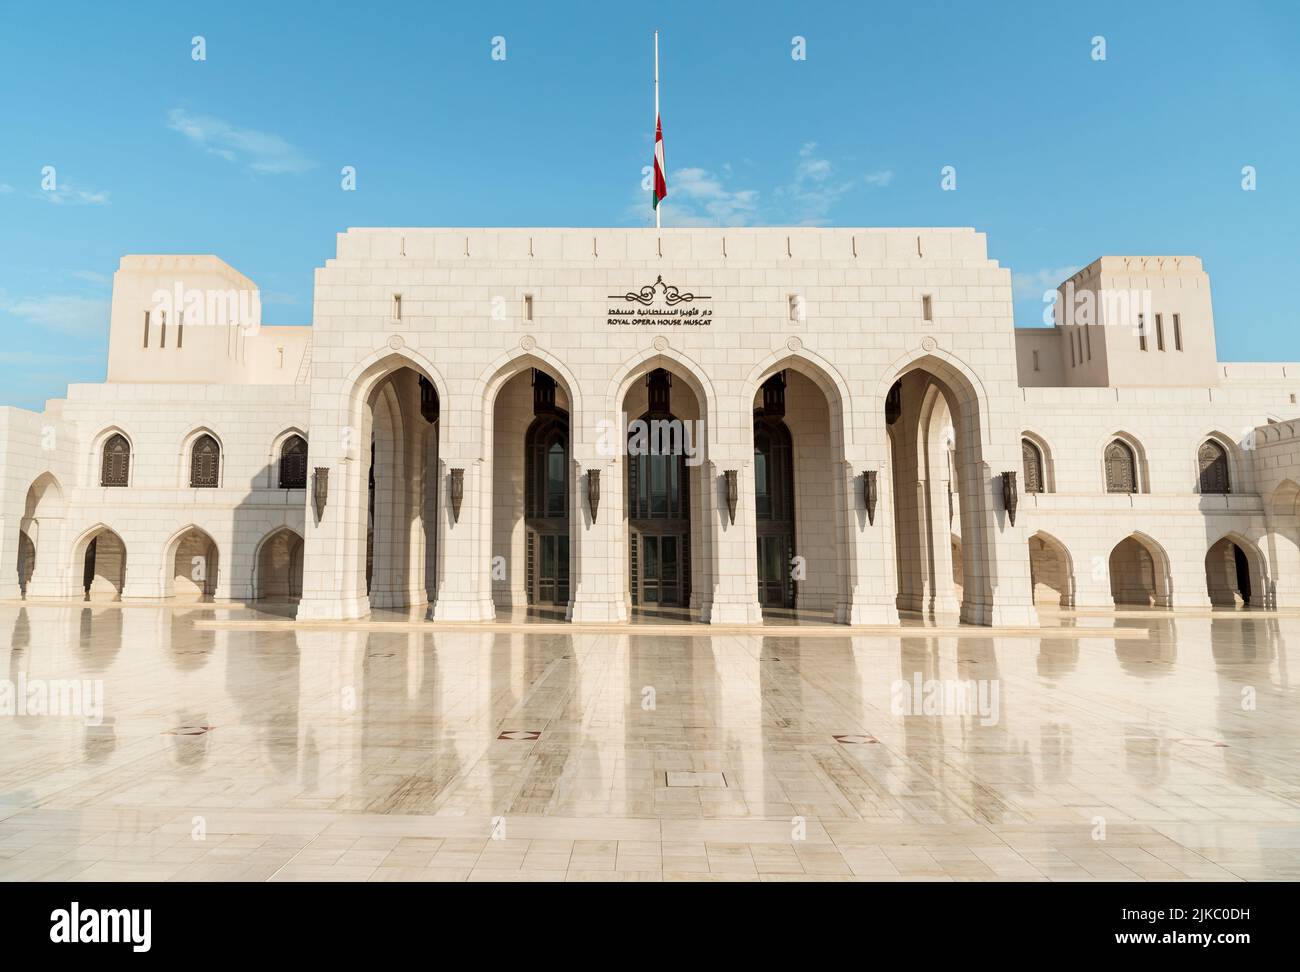 Facade of the Royal Opera House in Muscat with national flag of Oman in Muscat, Sultanate of Oman Stock Photo